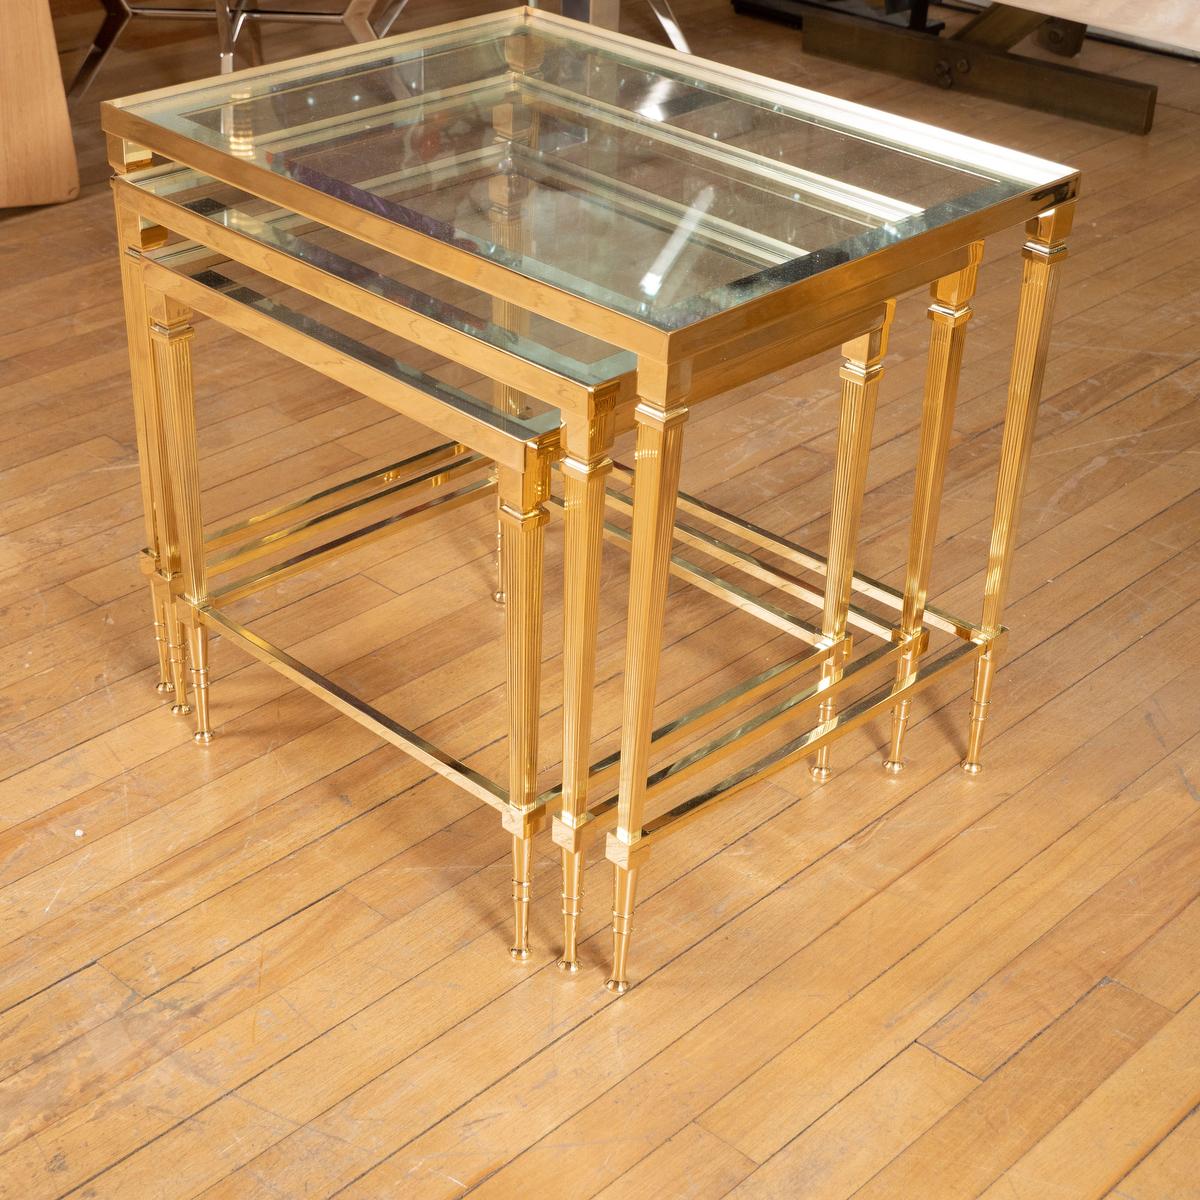 Trio of brass and glass nesting tables with decorative glass tops.